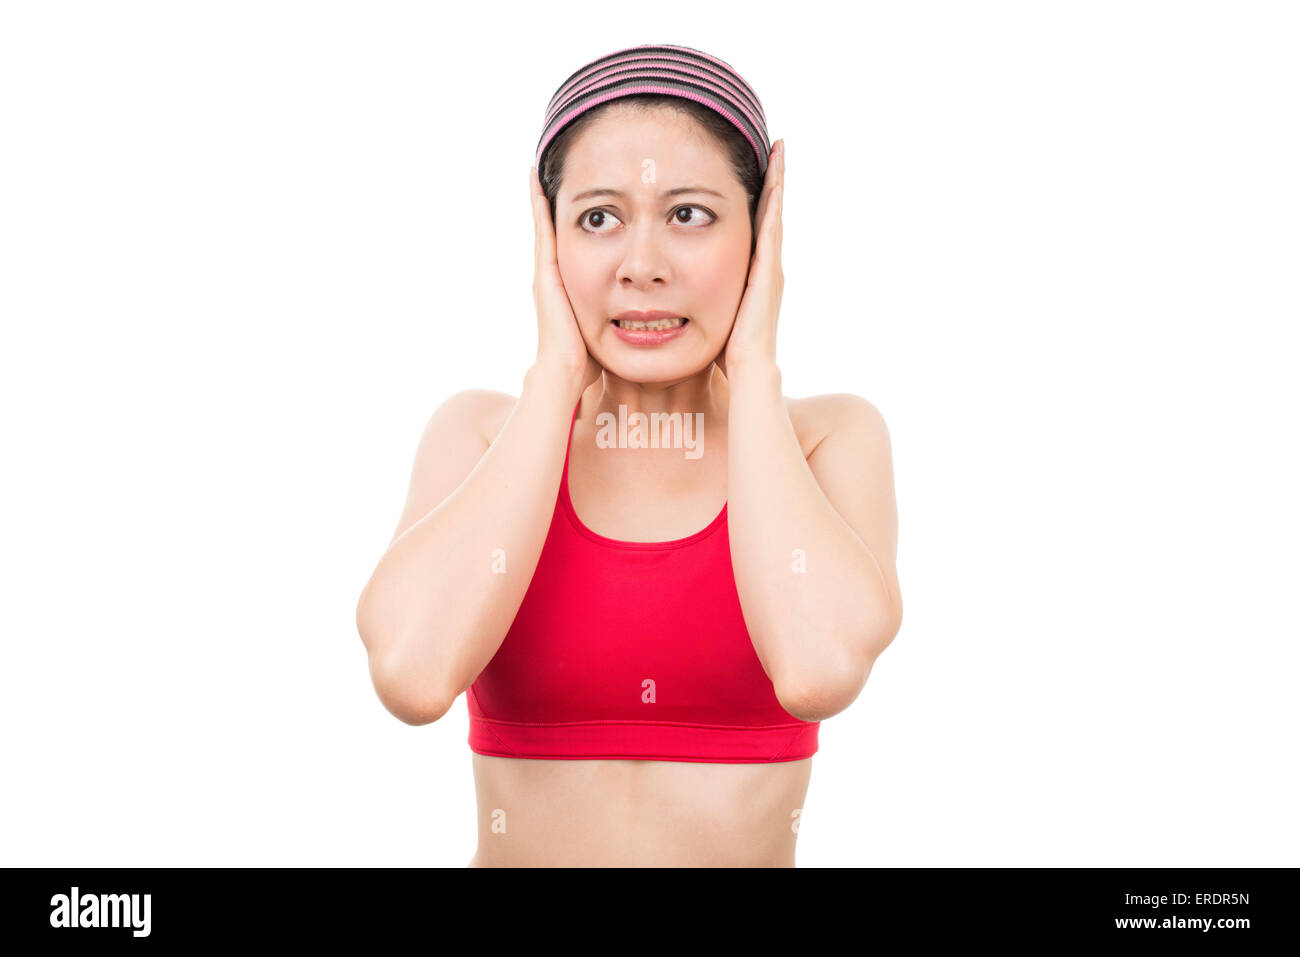 Women blocking out loud noise from ears Stock Photo